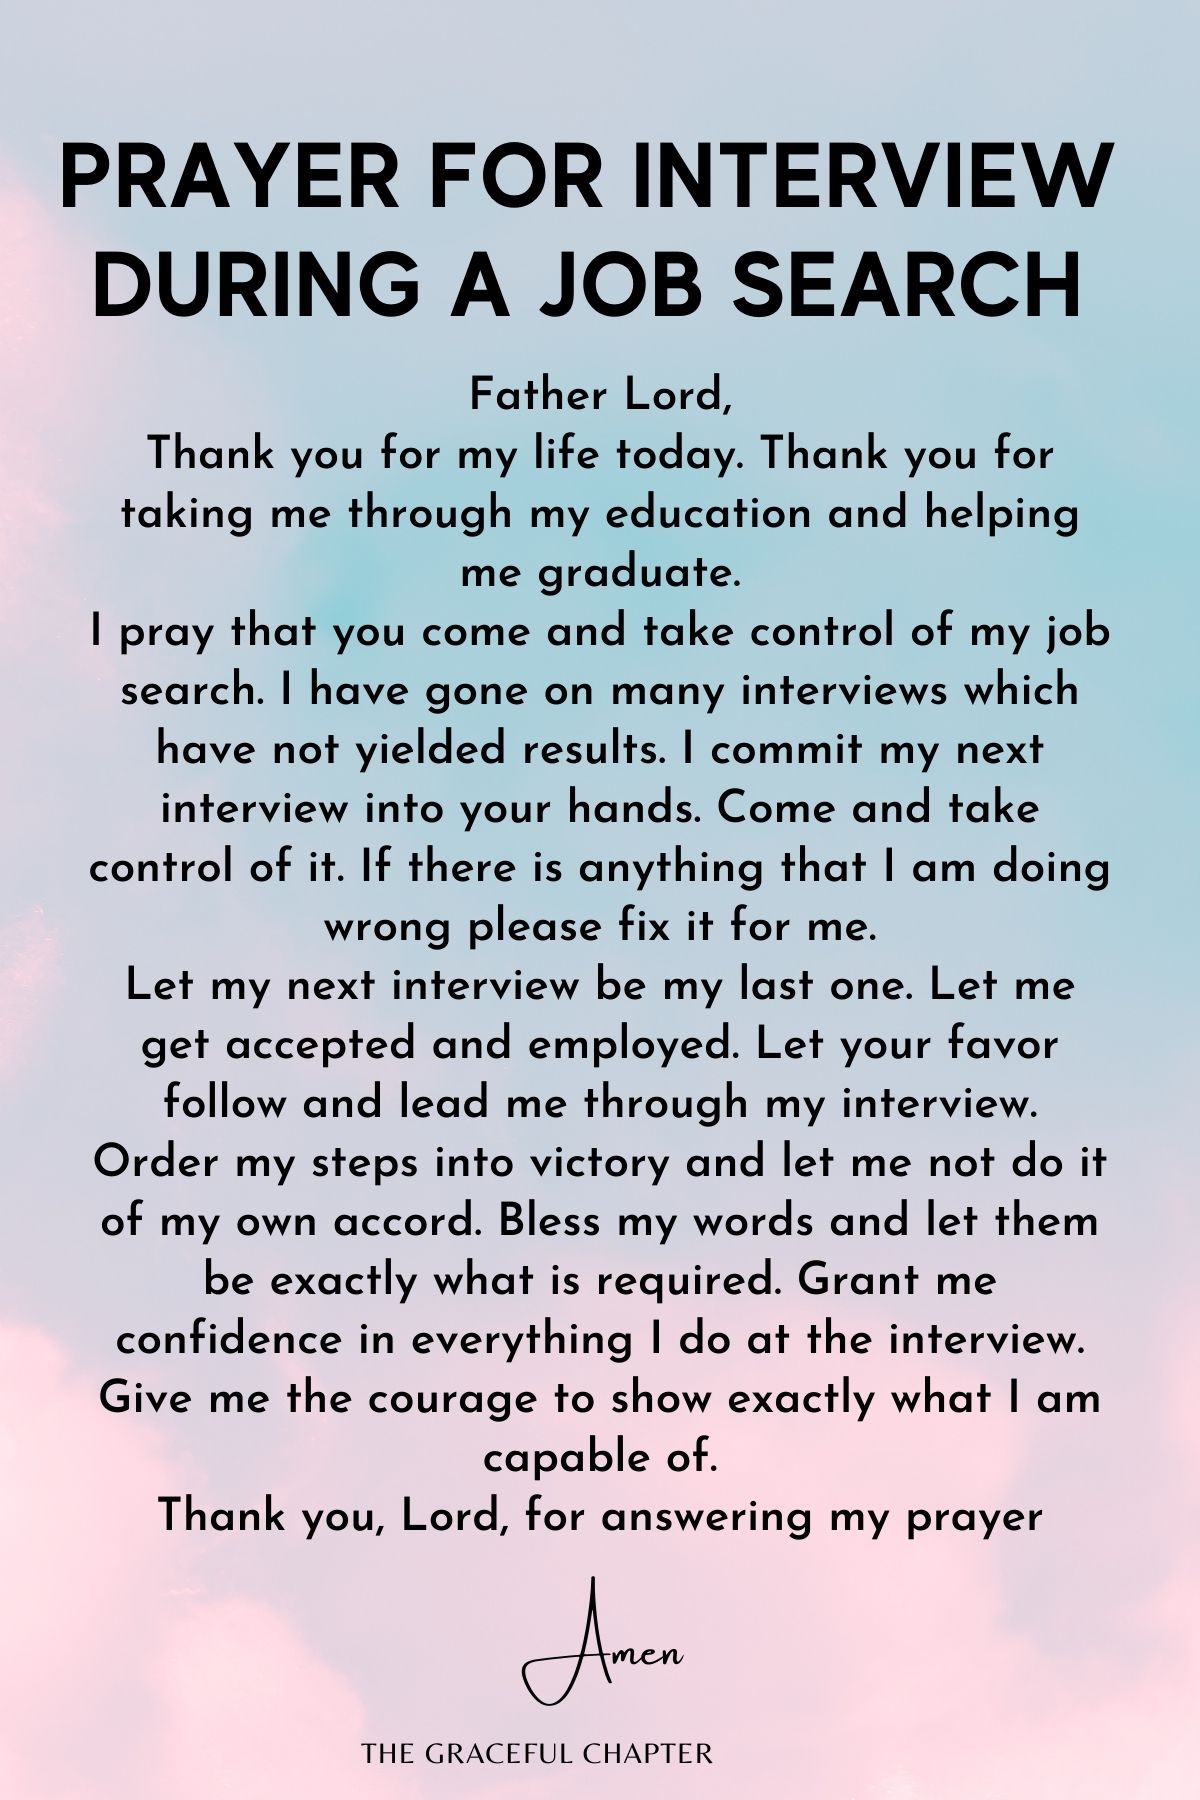 Prayer for Interview During a Job Search